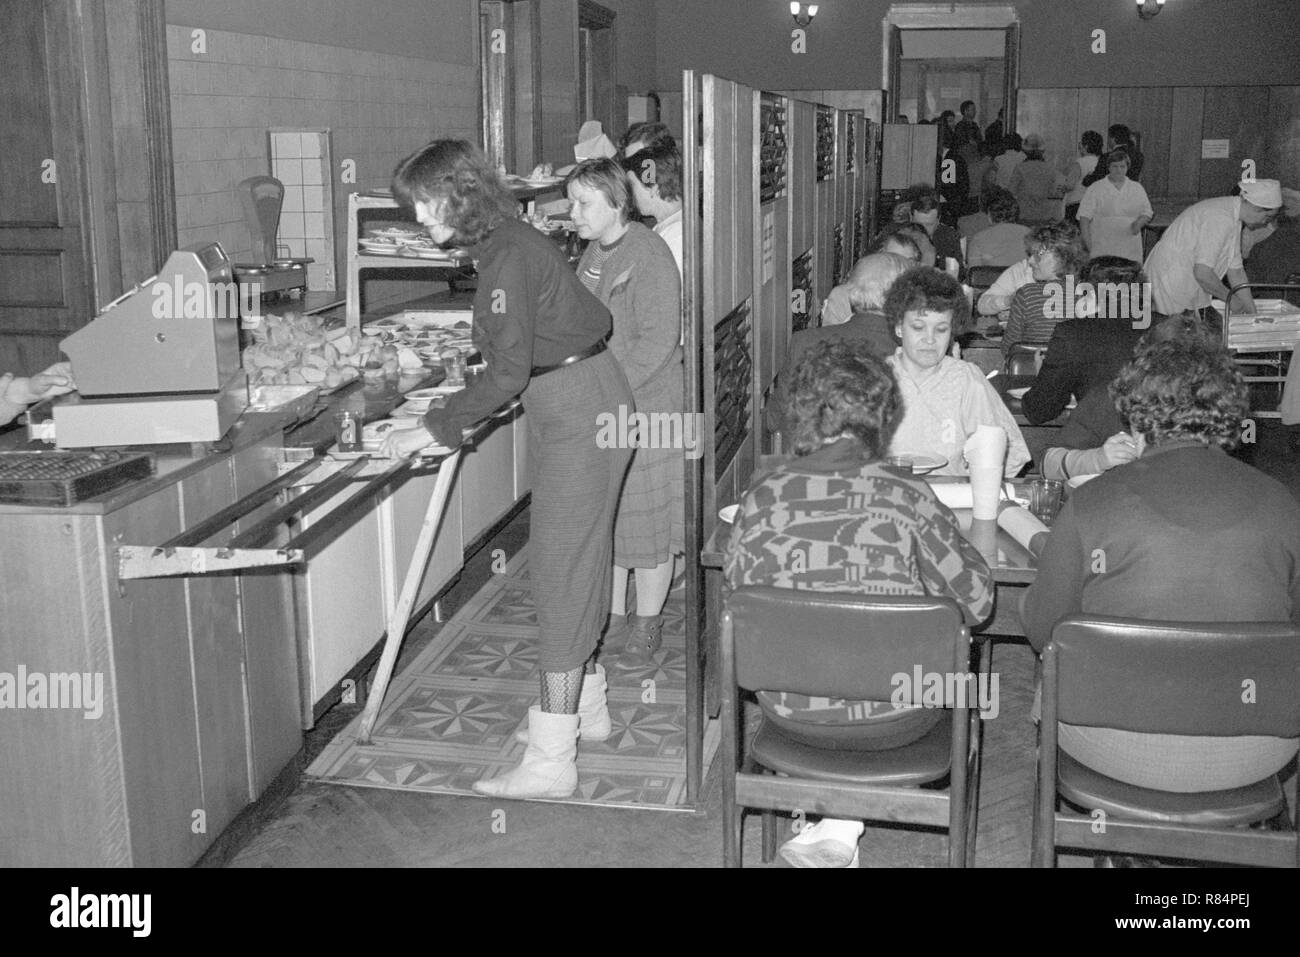 Moscow, USSR - November 23, 1989: Canteen in the Ministry of the Automotive Industry of the USSR. On the left employees standing in line to pay for food. On the right they have dinner or lunch. Stock Photo